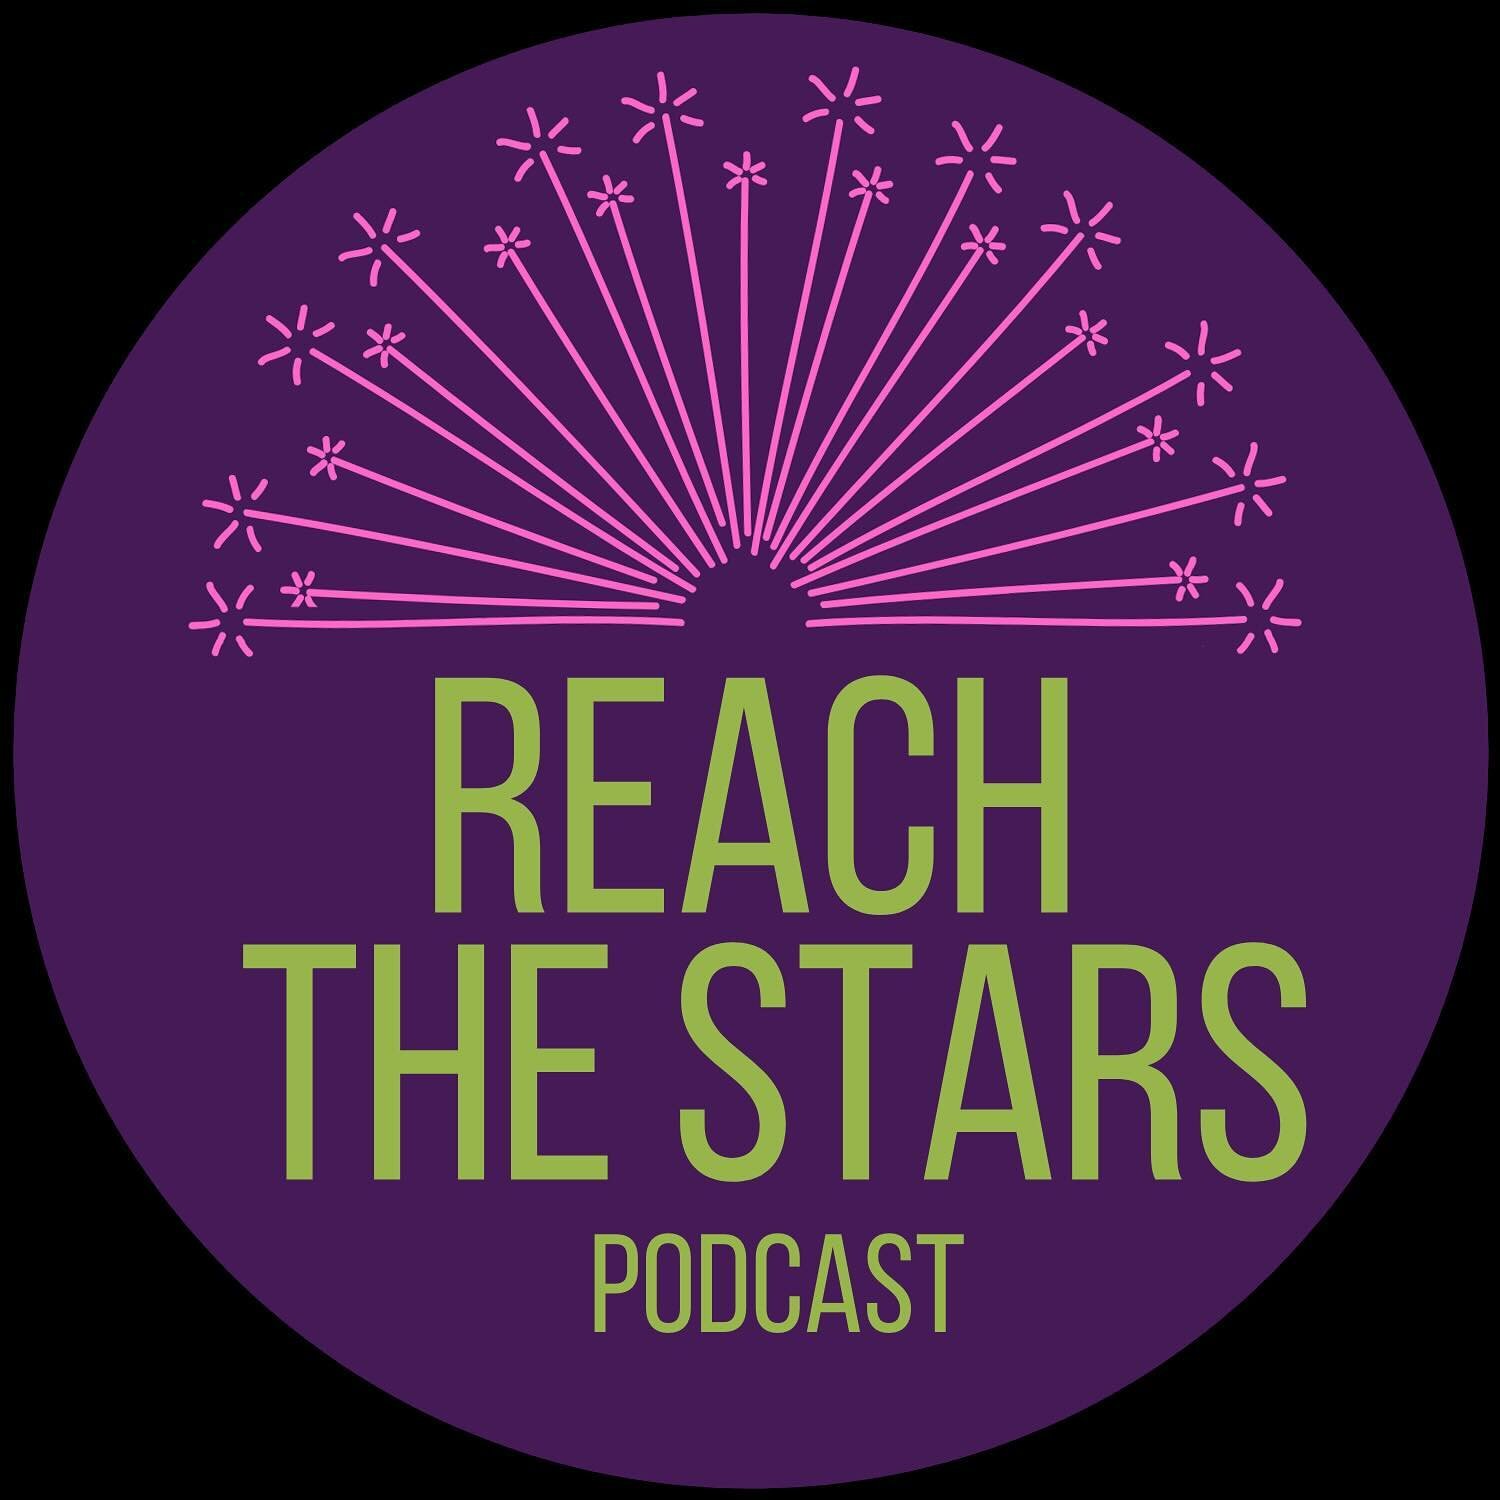 Did you know we have a podcast?? It&rsquo;s called @reachthestars.podcast and it&rsquo;s a collection of conversations with cool people who do cool things Inspiring stories of persistence, passion and purpose. 

I started it in 2020 to feel connected